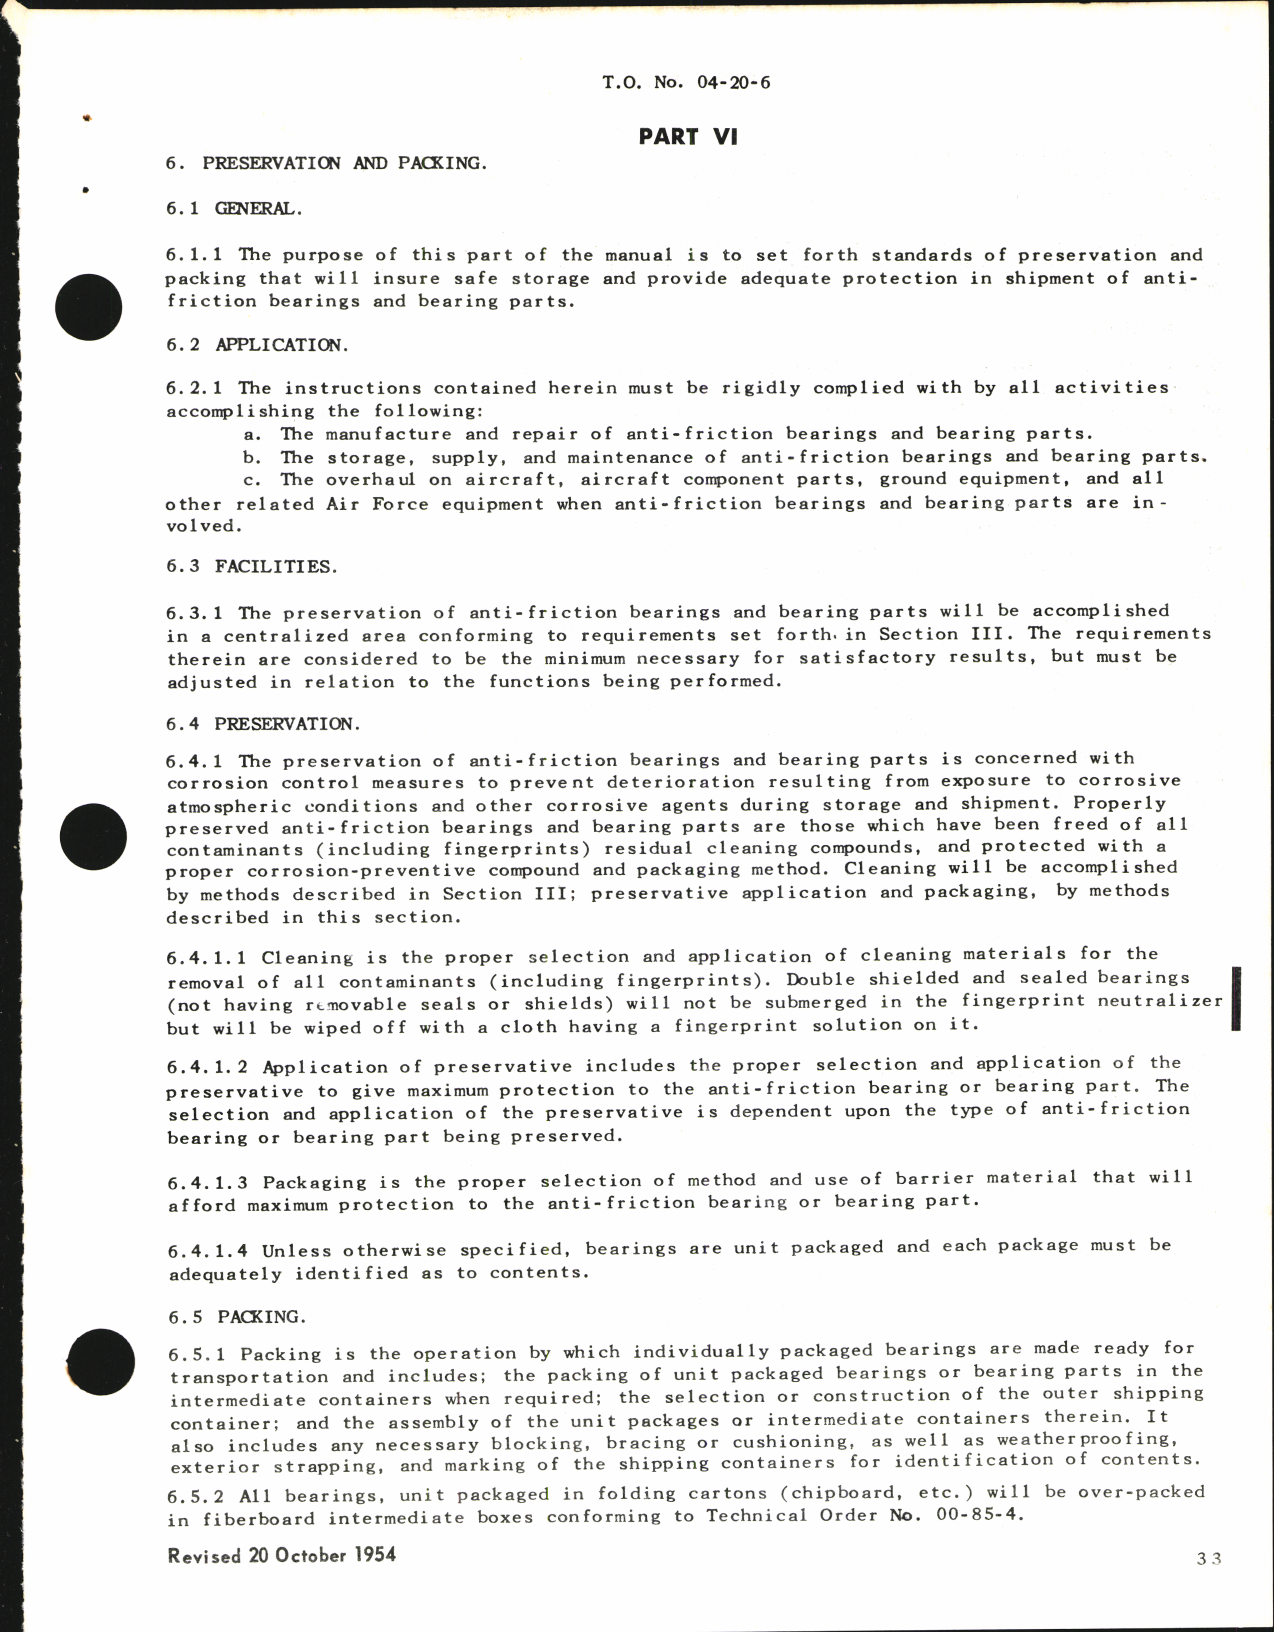 Sample page 7 from AirCorps Library document: Maintenance Instructions for Anti-Friction Bearings